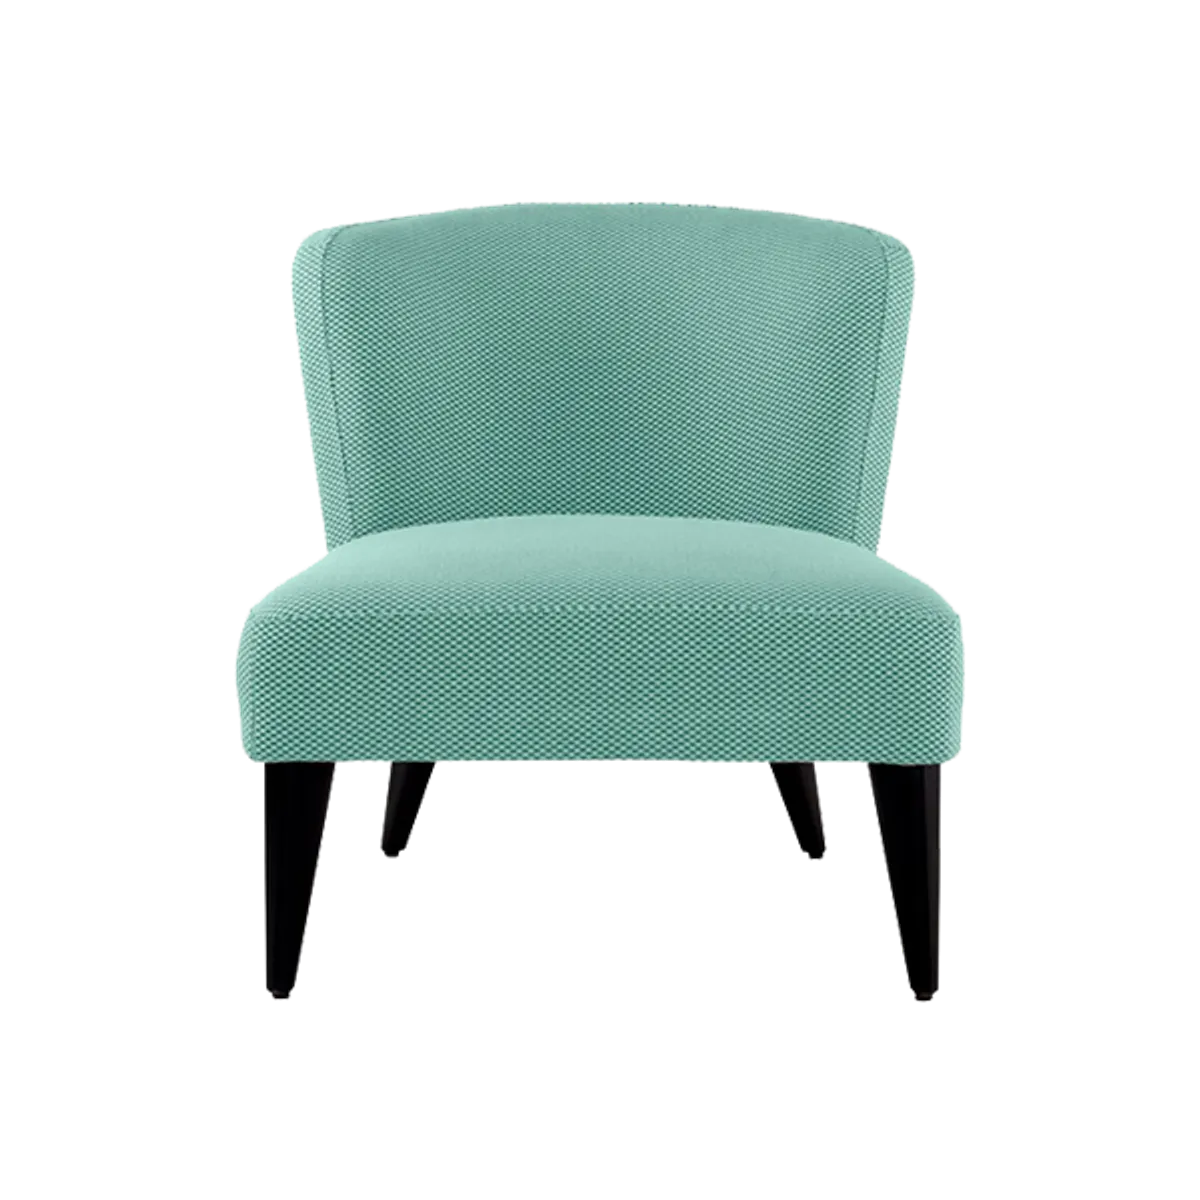 WEB keat lounge chair luxury hotel furniture by insideout contracts 0382